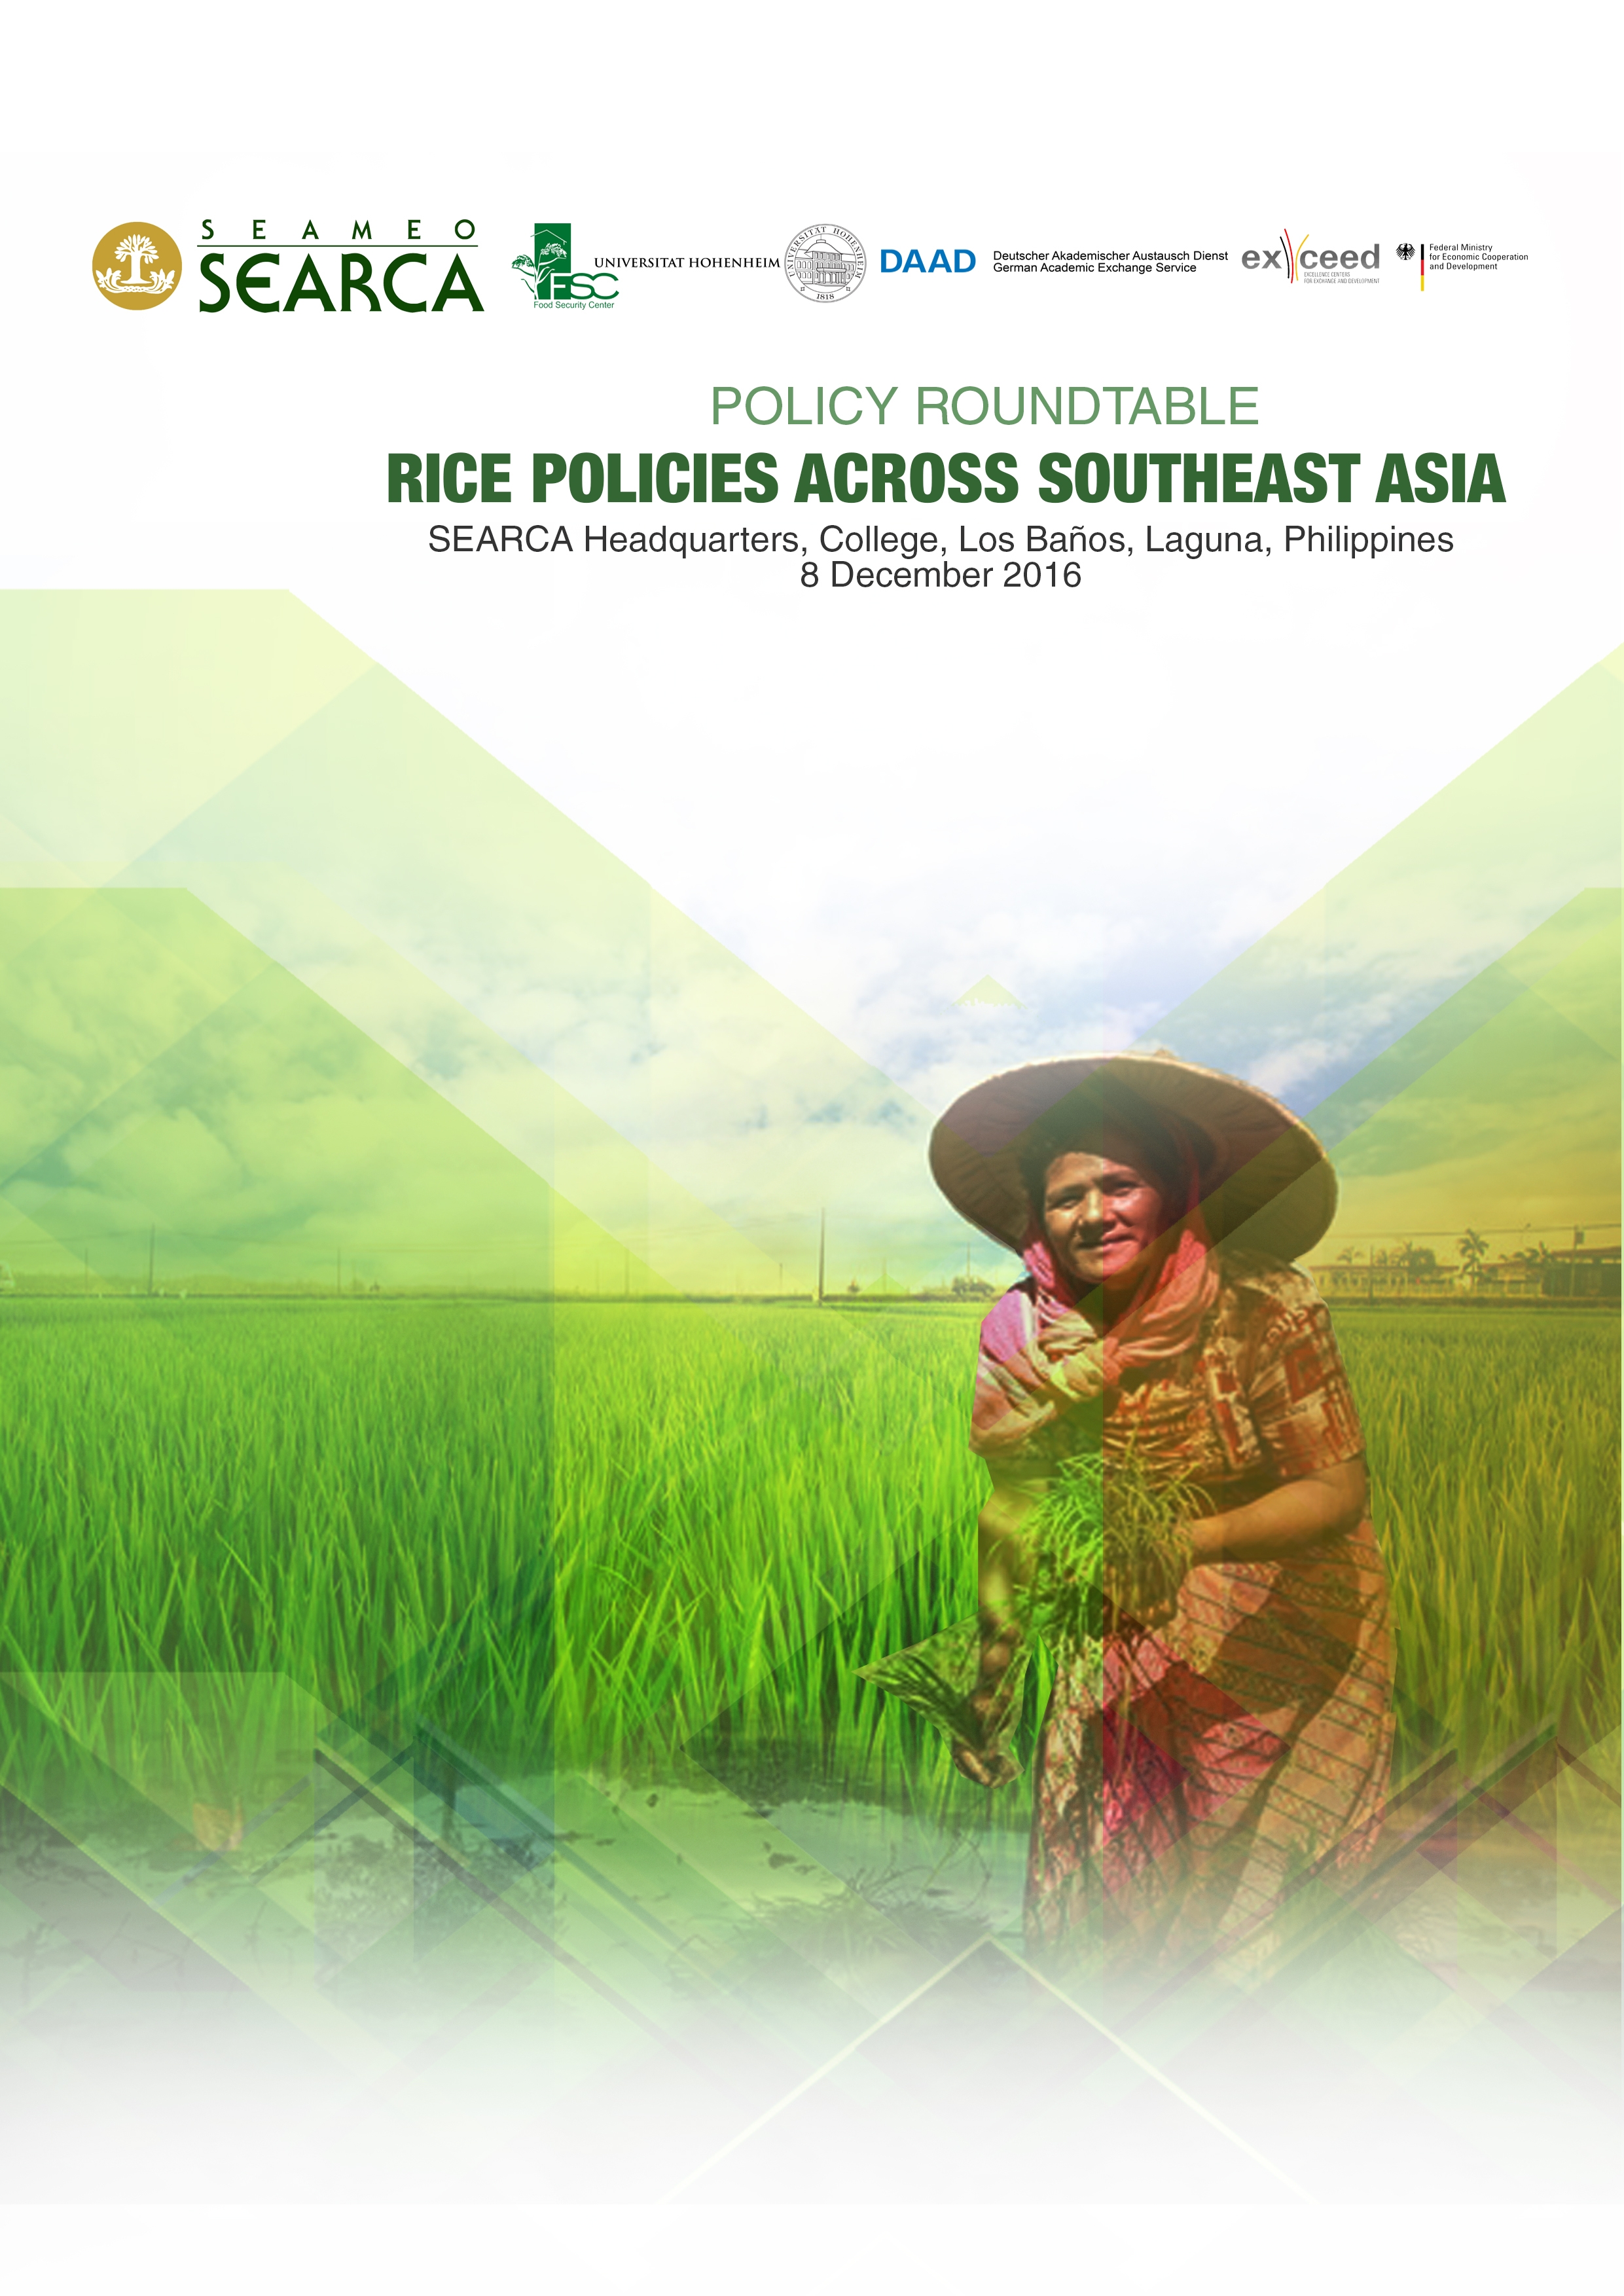 POLICY ROUNDTABLE: Rice Policies Across Southeast Asia